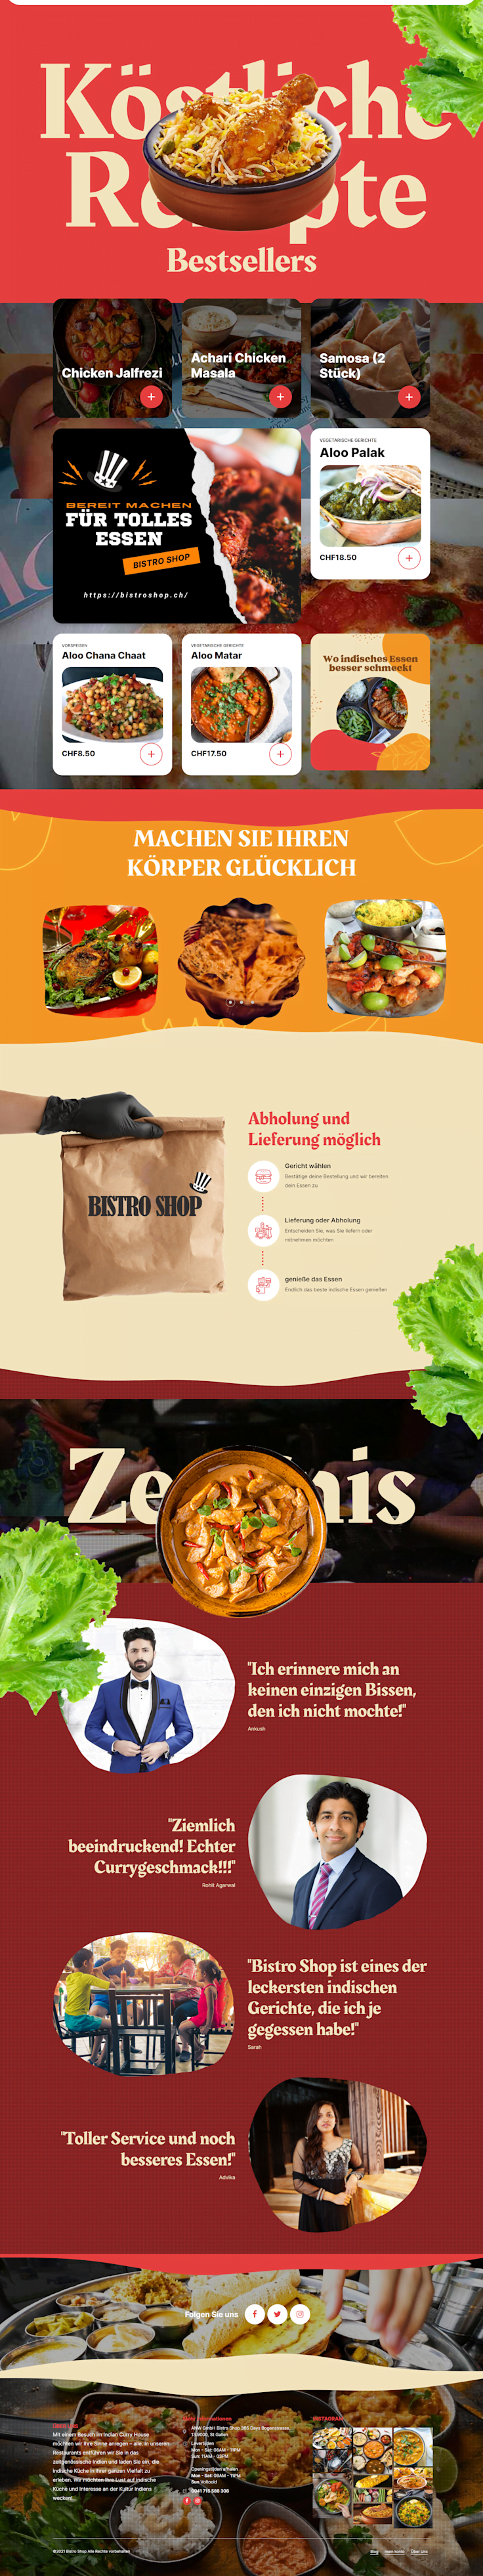 An Illustration of a beautifully designed e-commerce website selling food recipes, showcasing delicious dishes and ingredients.